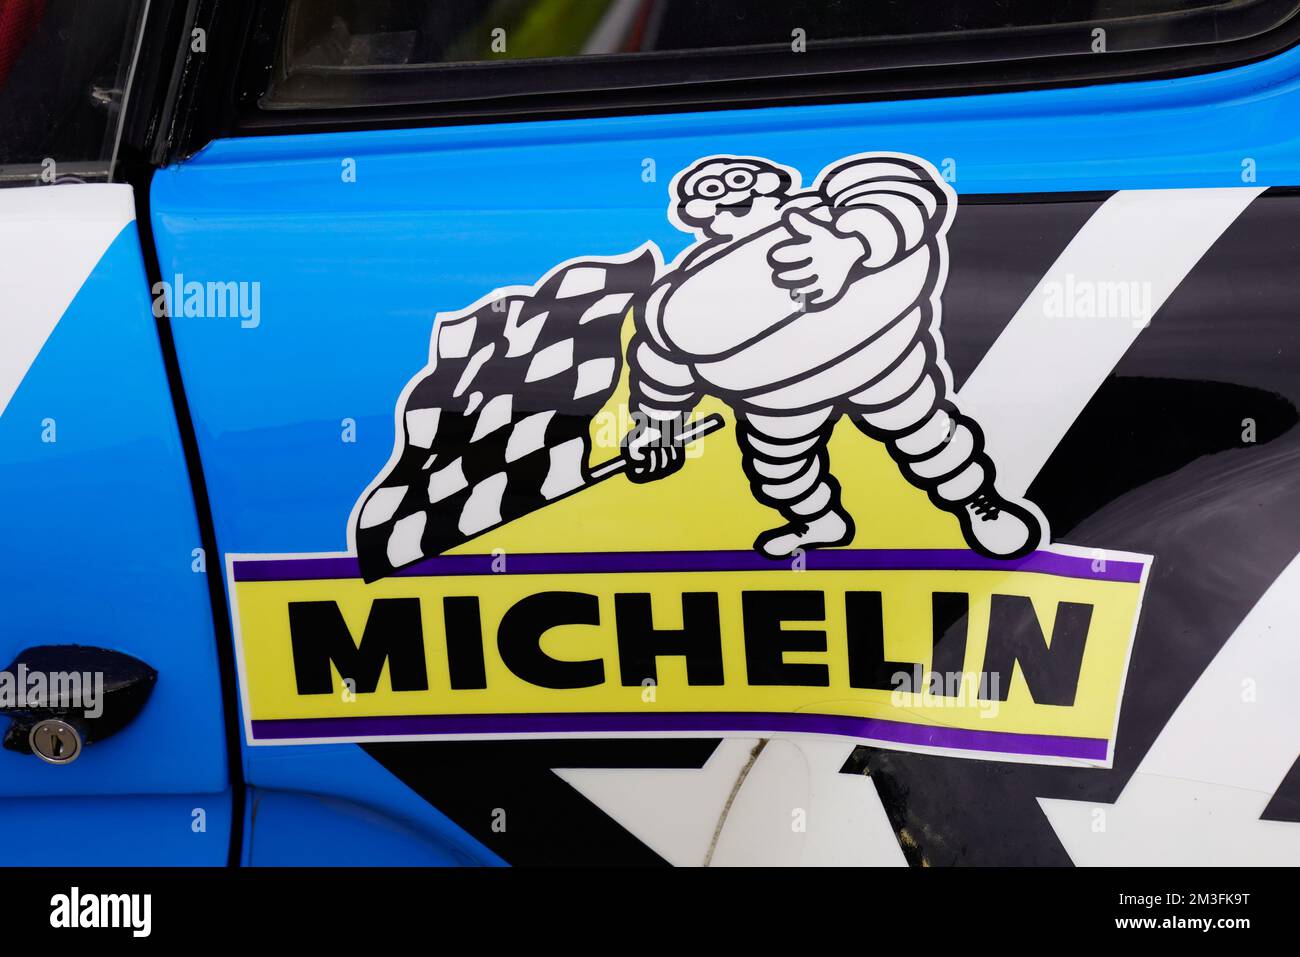 Bordeaux , Aquitaine  France - 11 06 2022 : Michelin text brand and logo sign on race rally side car of tire manufacturer sport racing vehicle Stock Photo